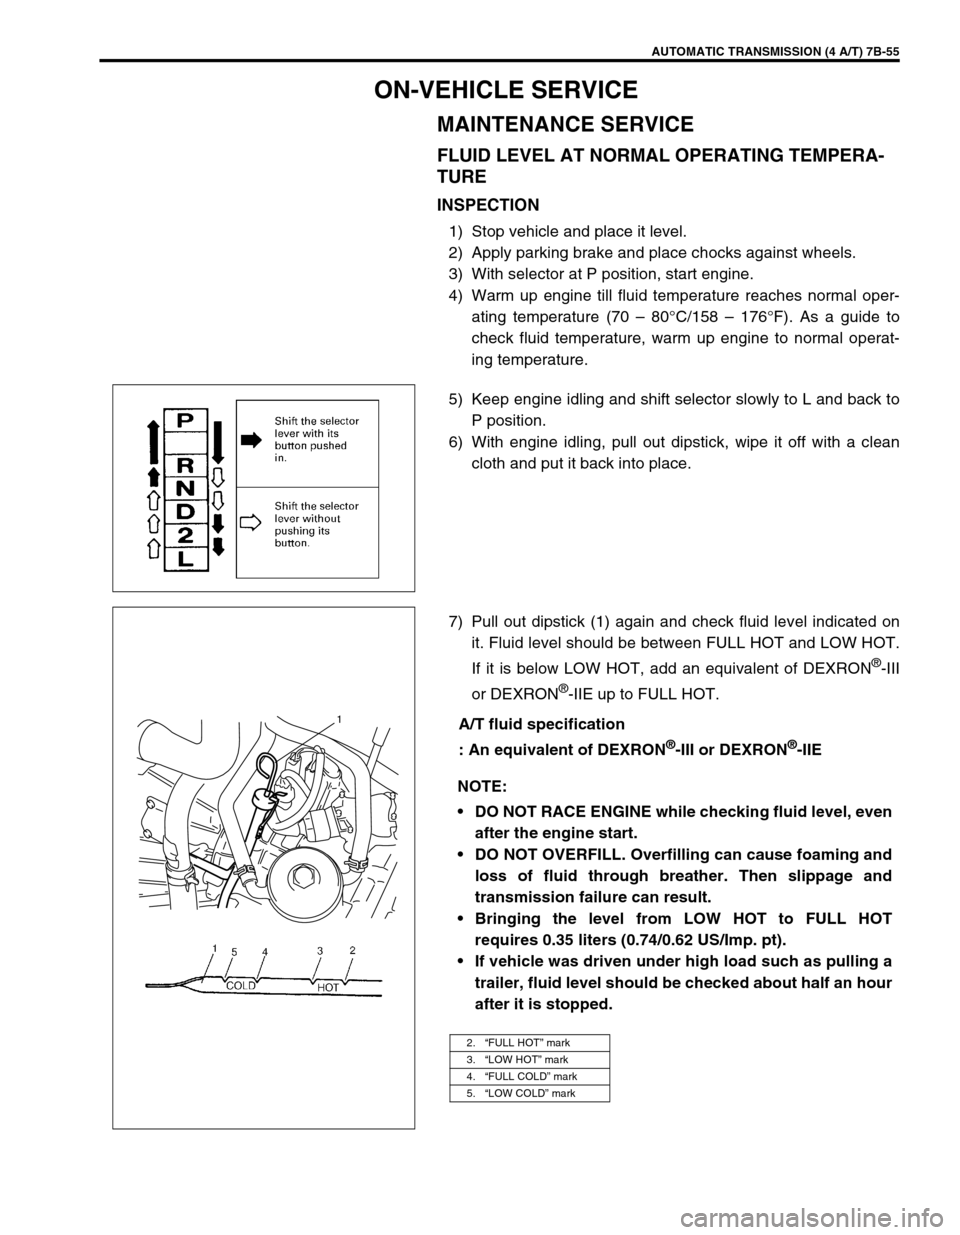 SUZUKI SWIFT 2000 1.G Transmission Service Owners Manual AUTOMATIC TRANSMISSION (4 A/T) 7B-55
ON-VEHICLE SERVICE
MAINTENANCE SERVICE
FLUID LEVEL AT NORMAL OPERATING TEMPERA-
TURE
INSPECTION
1) Stop vehicle and place it level.
2) Apply parking brake and plac